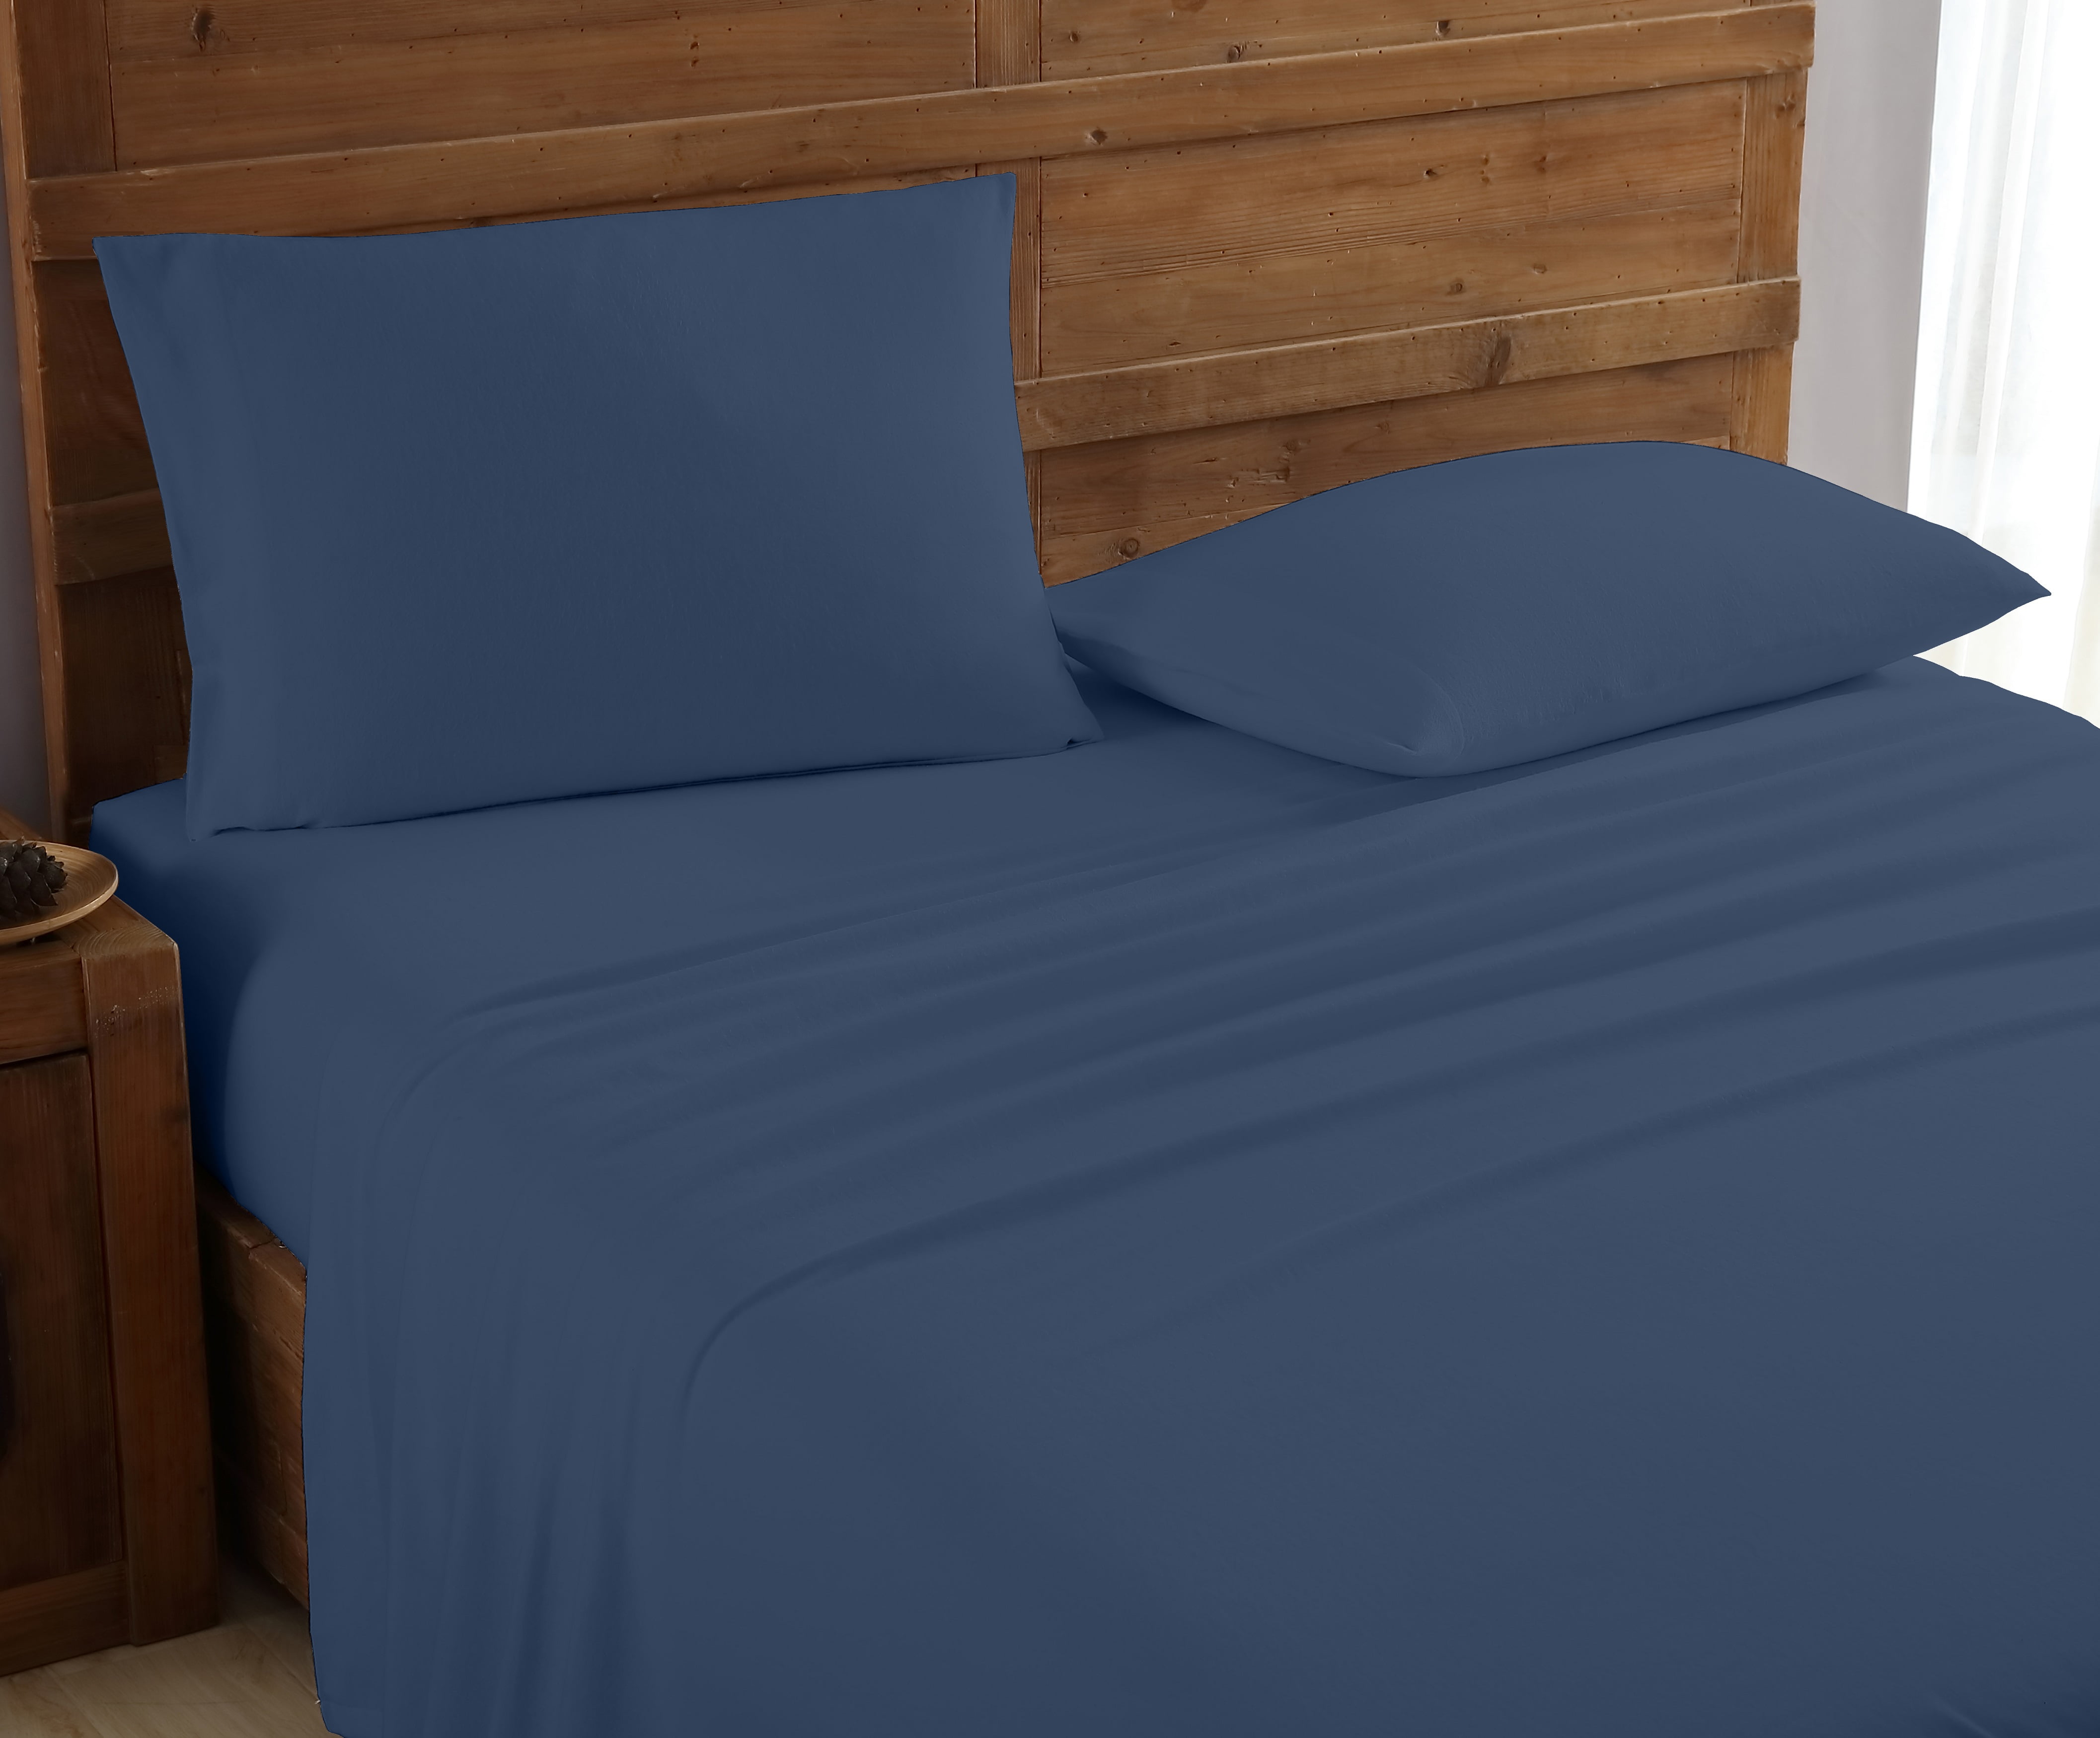 Dark Blue, King Luxury Hotel Quality King 4-Piece Bed Sheets Set with Deep Pockets BedStory Bed Sheets Set Hypoallergenic Super Soft Brushed Bedding Sheets-Wrinkle/Fade/Stain Resistant